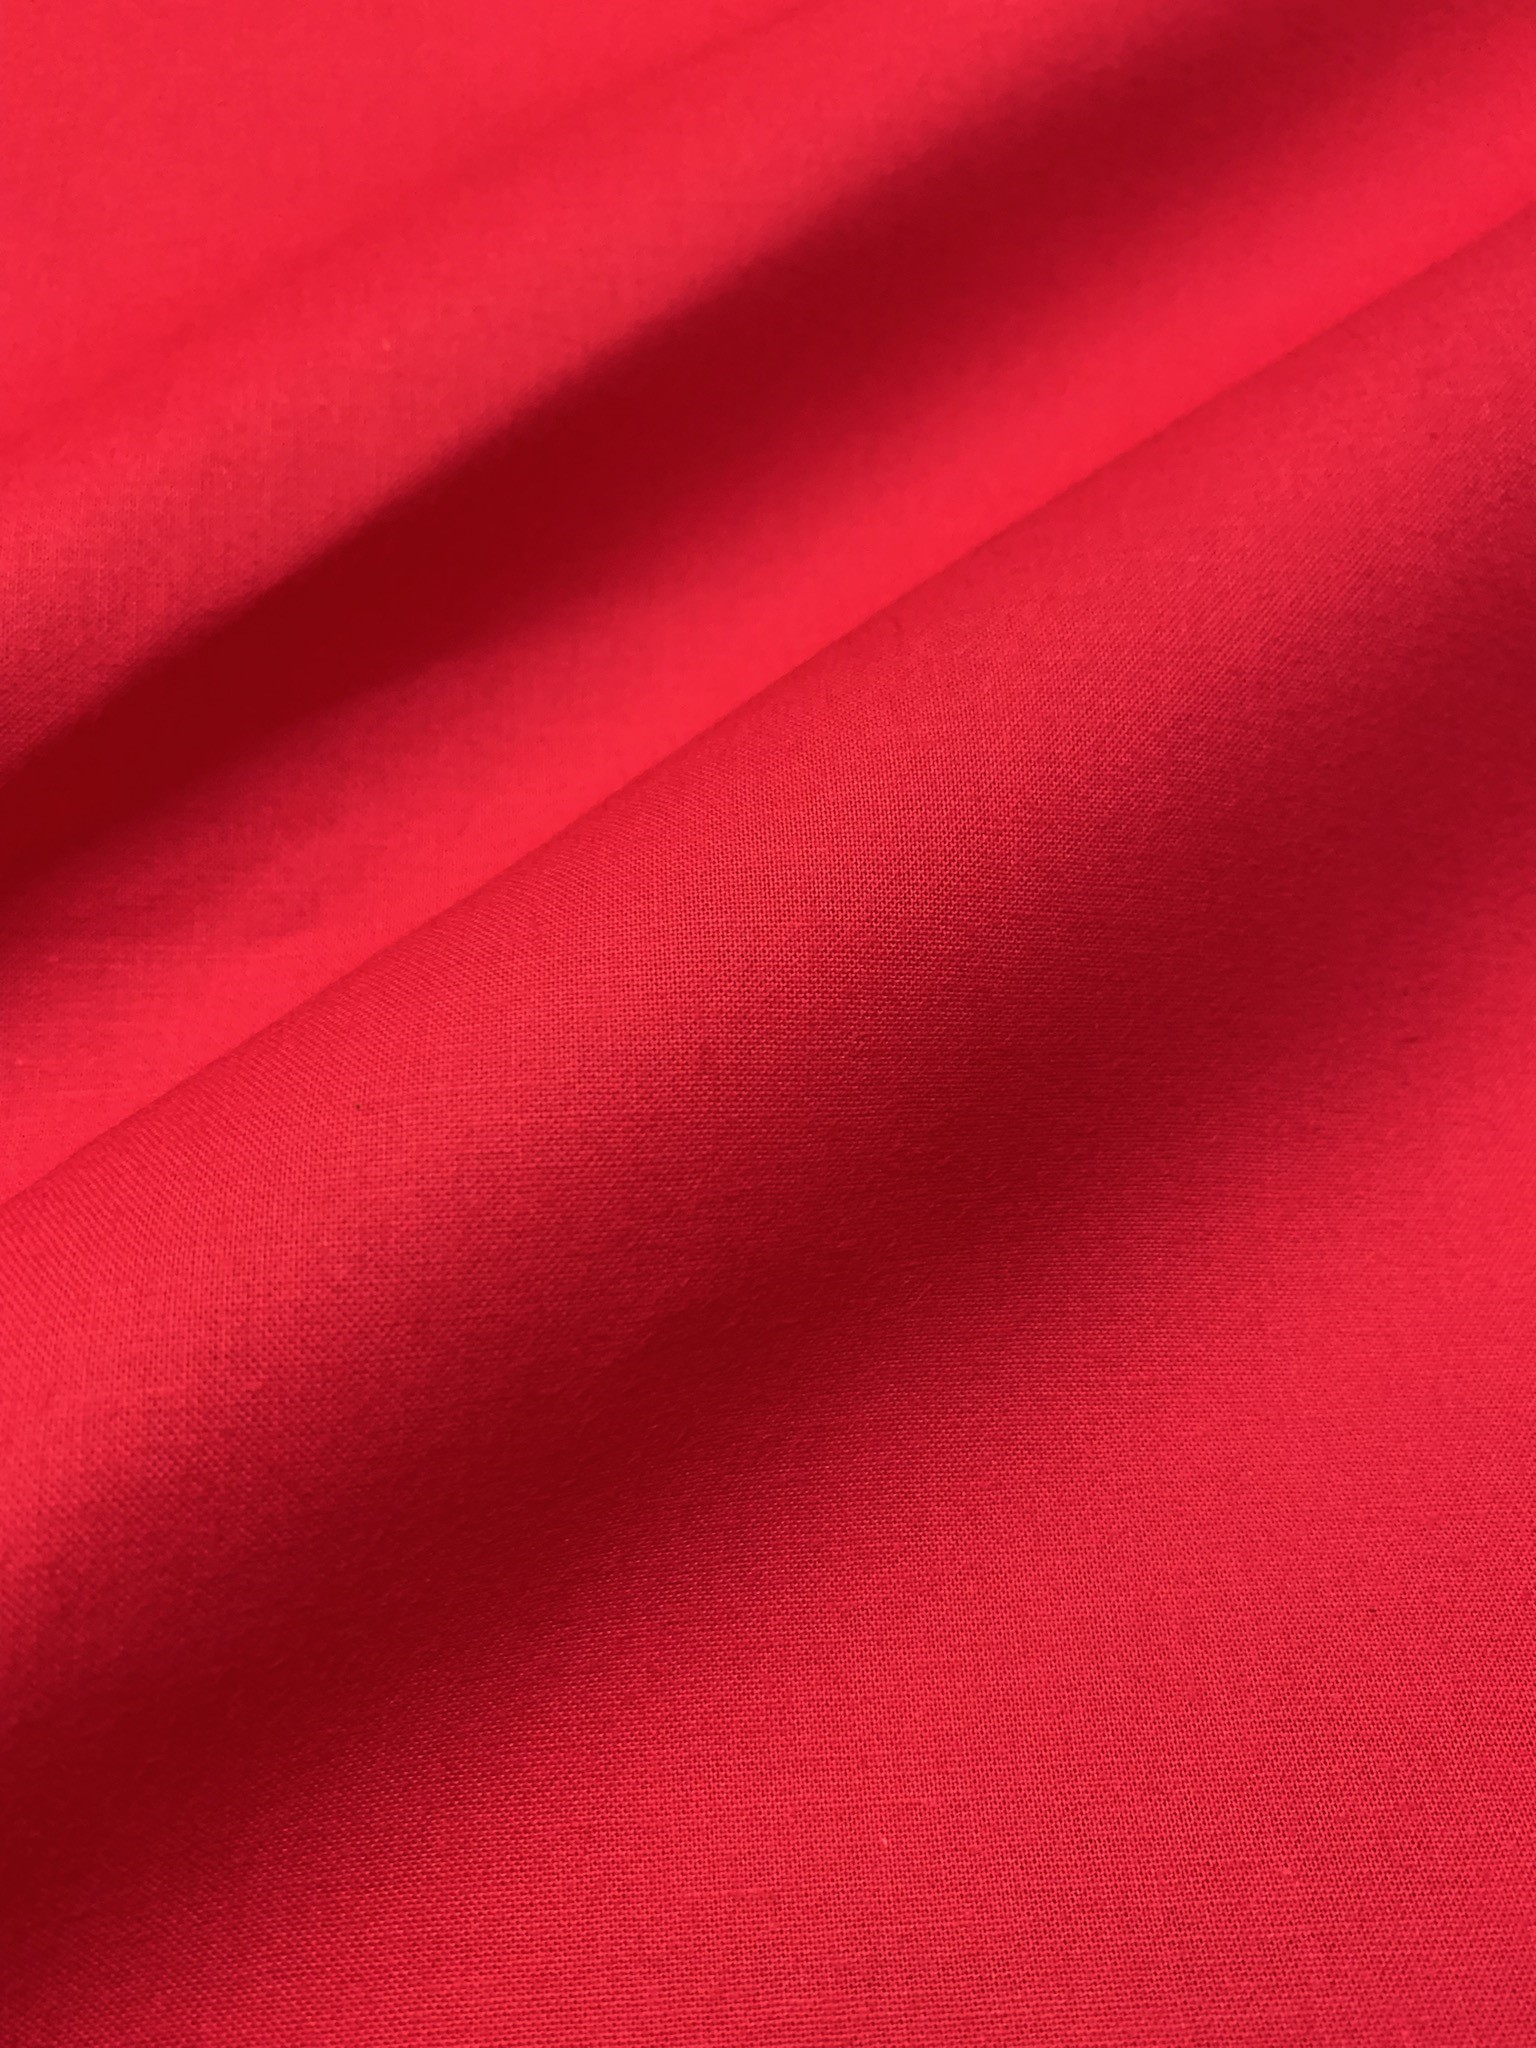 45" Red Muslin Fabric Per Yard - 100% Cotton - Click Image to Close